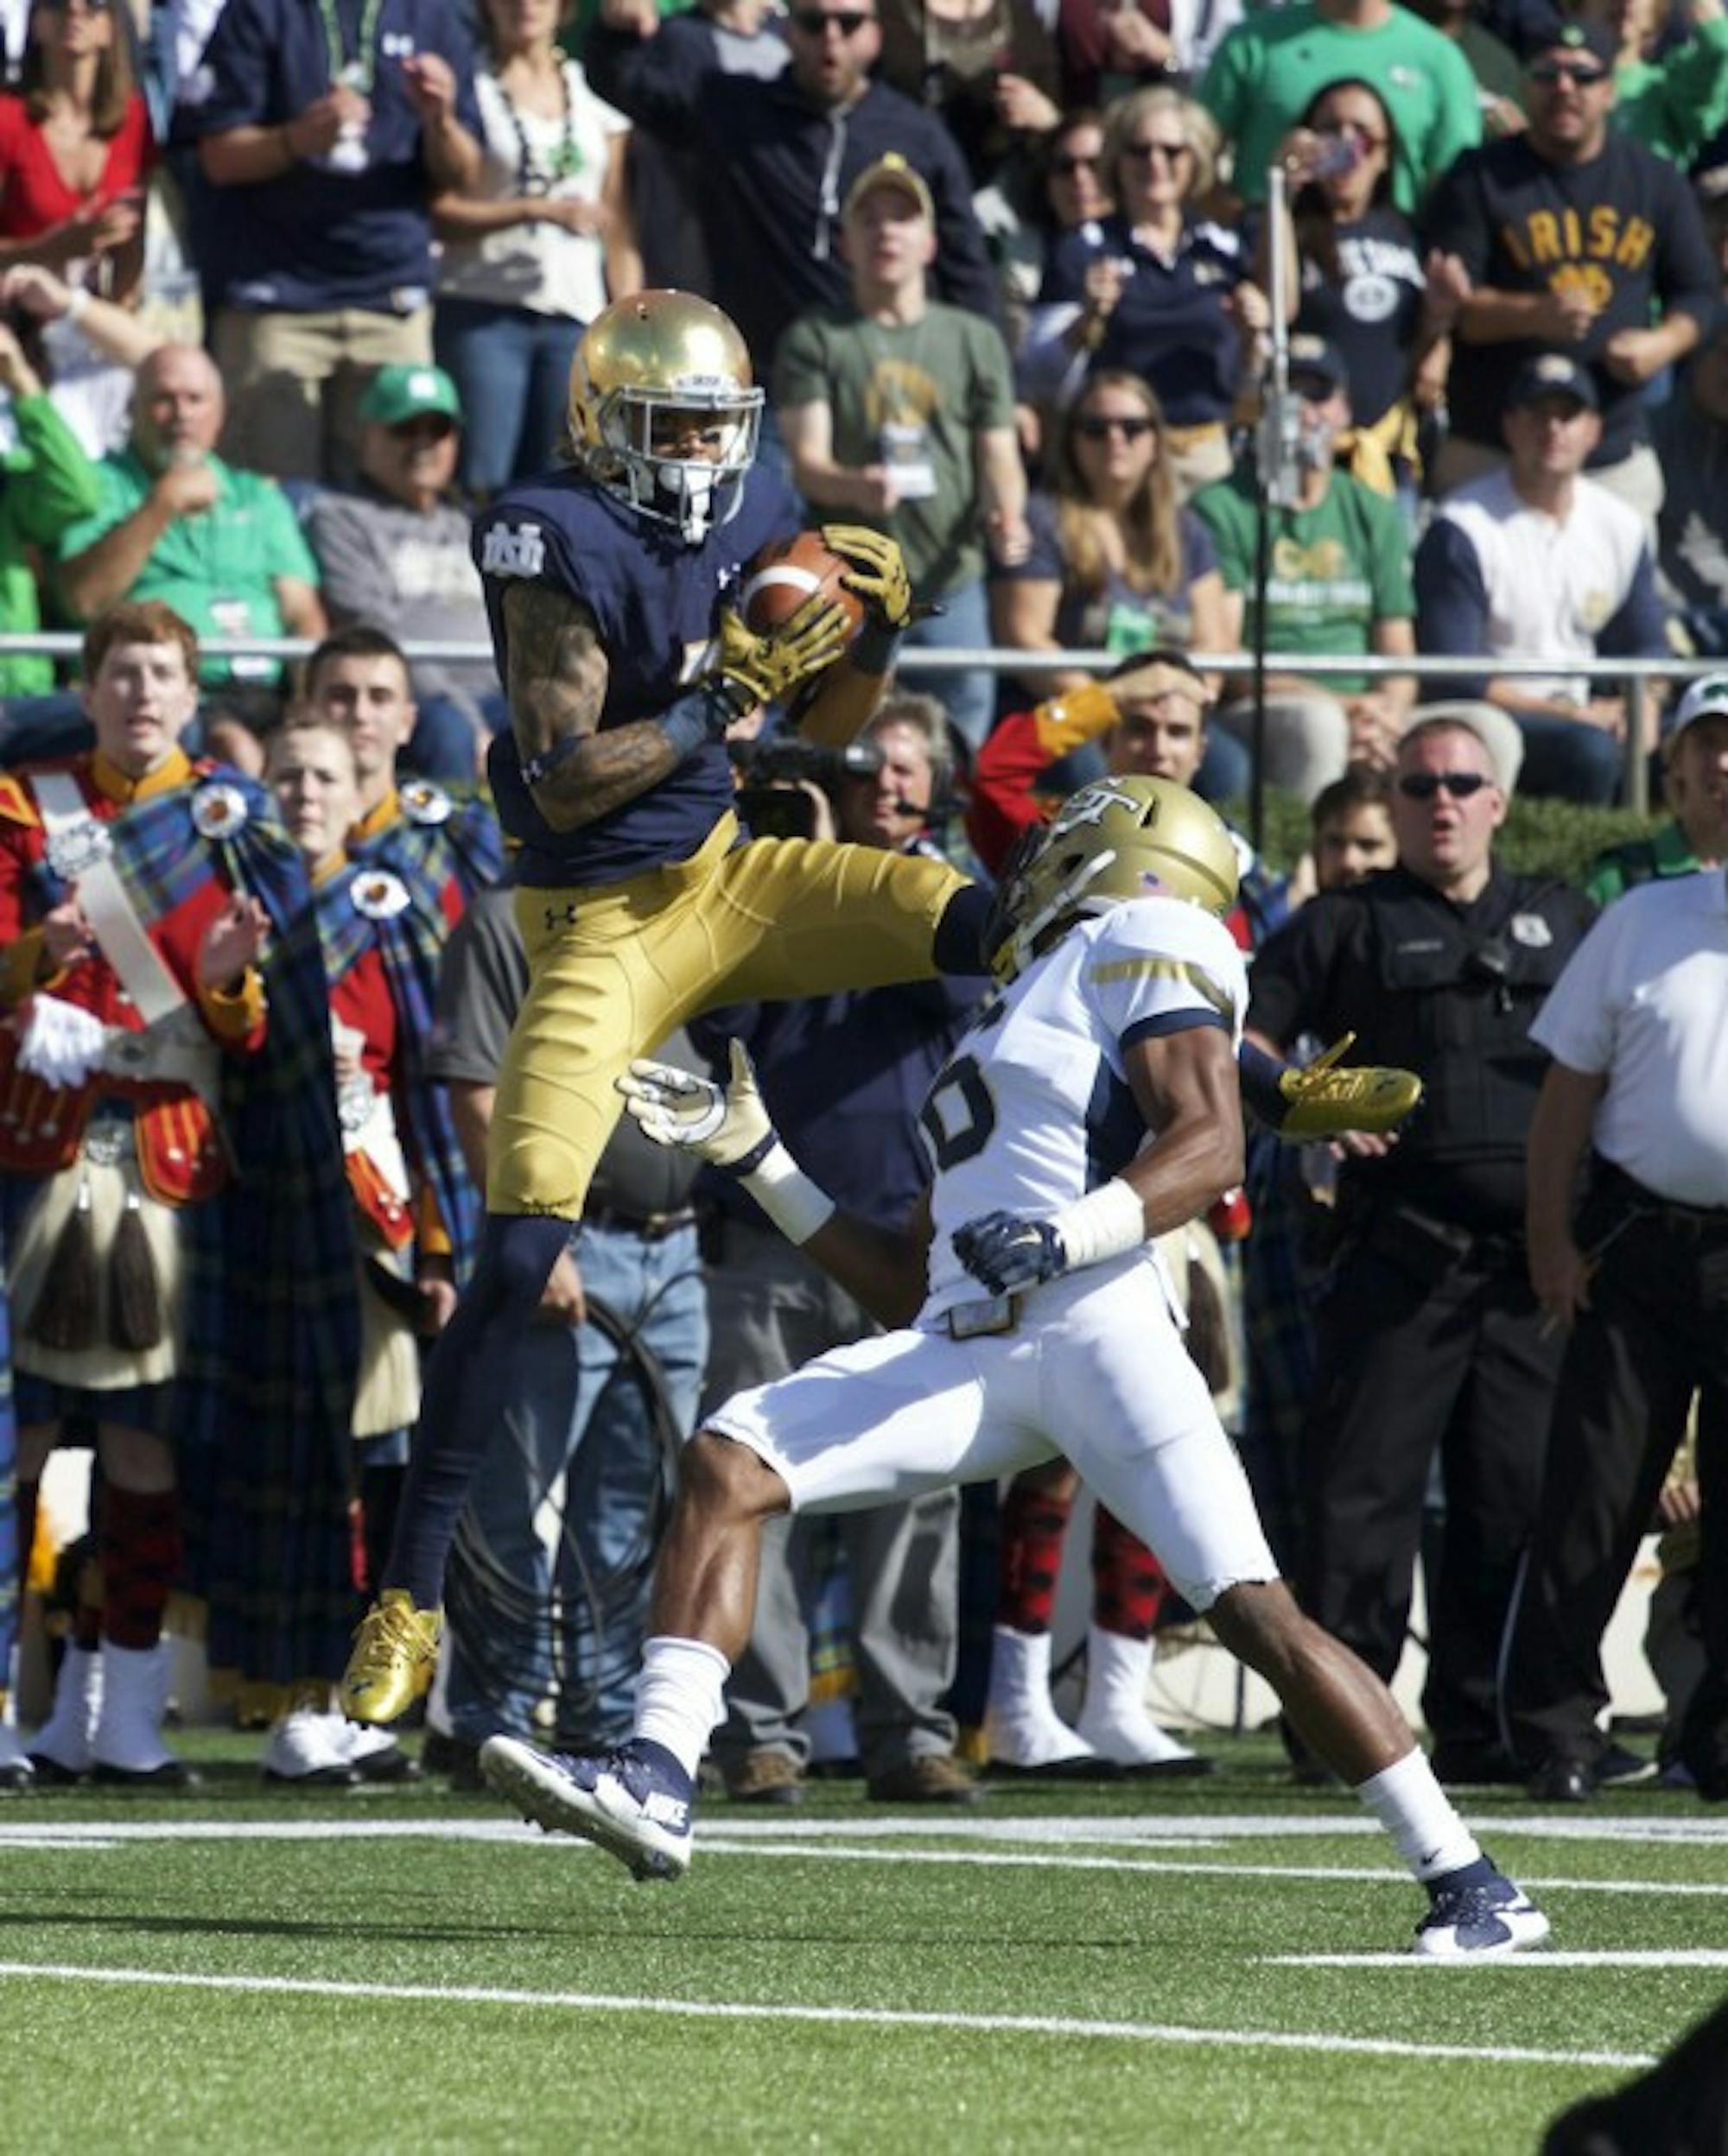 Irish junior receiver Will Fuller hauls in a 46-yard touchdown pass from sophomore quarterback DeShone Kizer in the first quarter of Notre Dame’s 30-22 win over Georgia Tech. With his performance Saturday, Fuller topped the 100-yard mark for the third time in as many games this year, and sits fifth nationally with 397 receiving yards on the season.